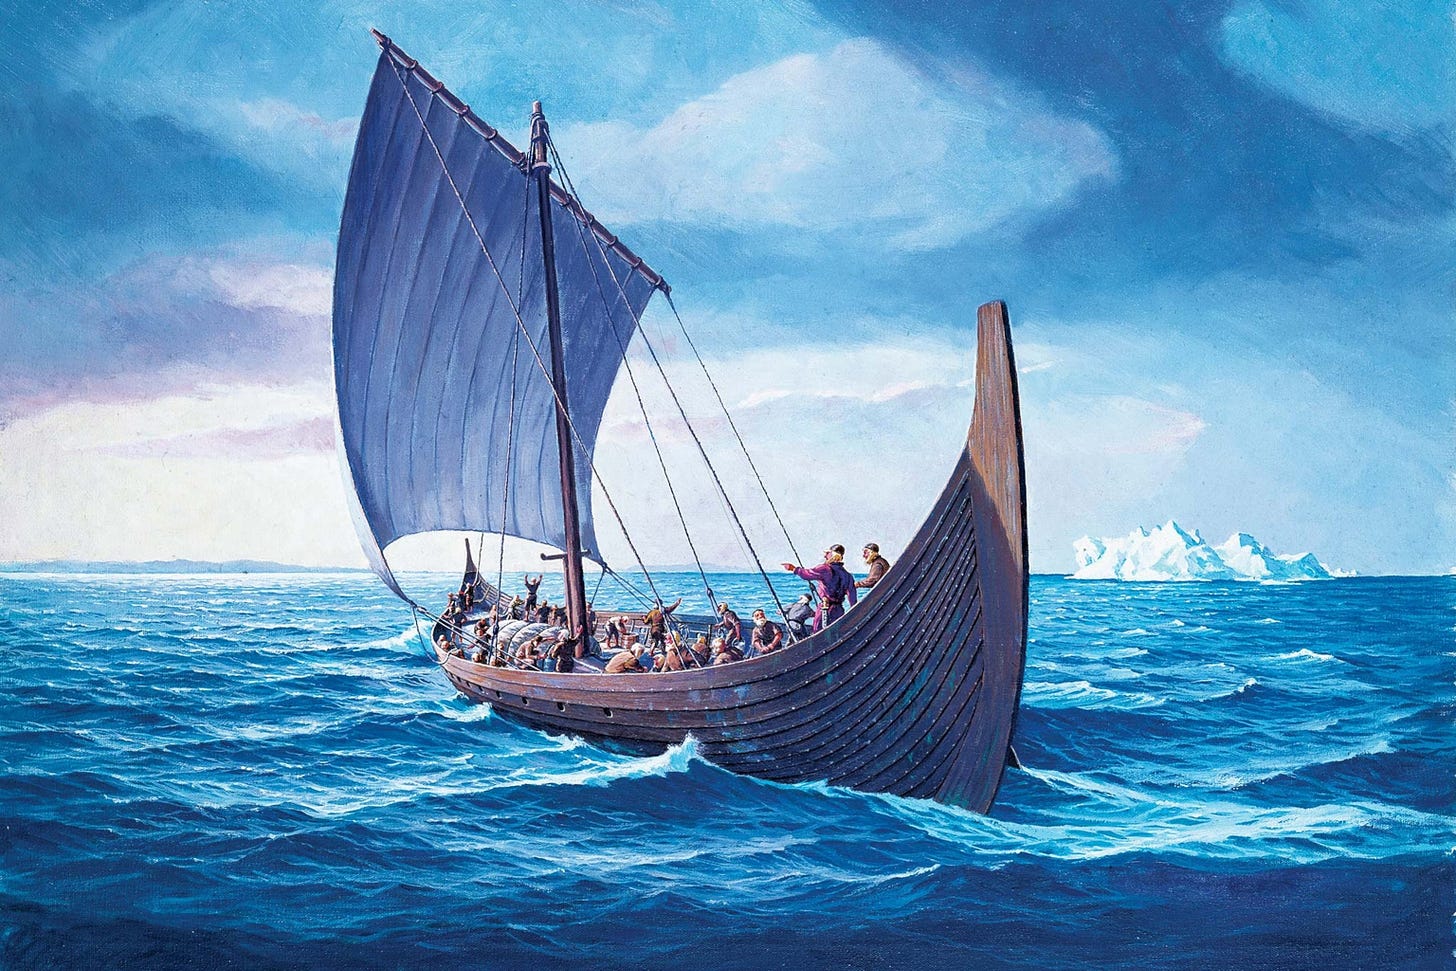 Vikings in North America? Here's what we really know